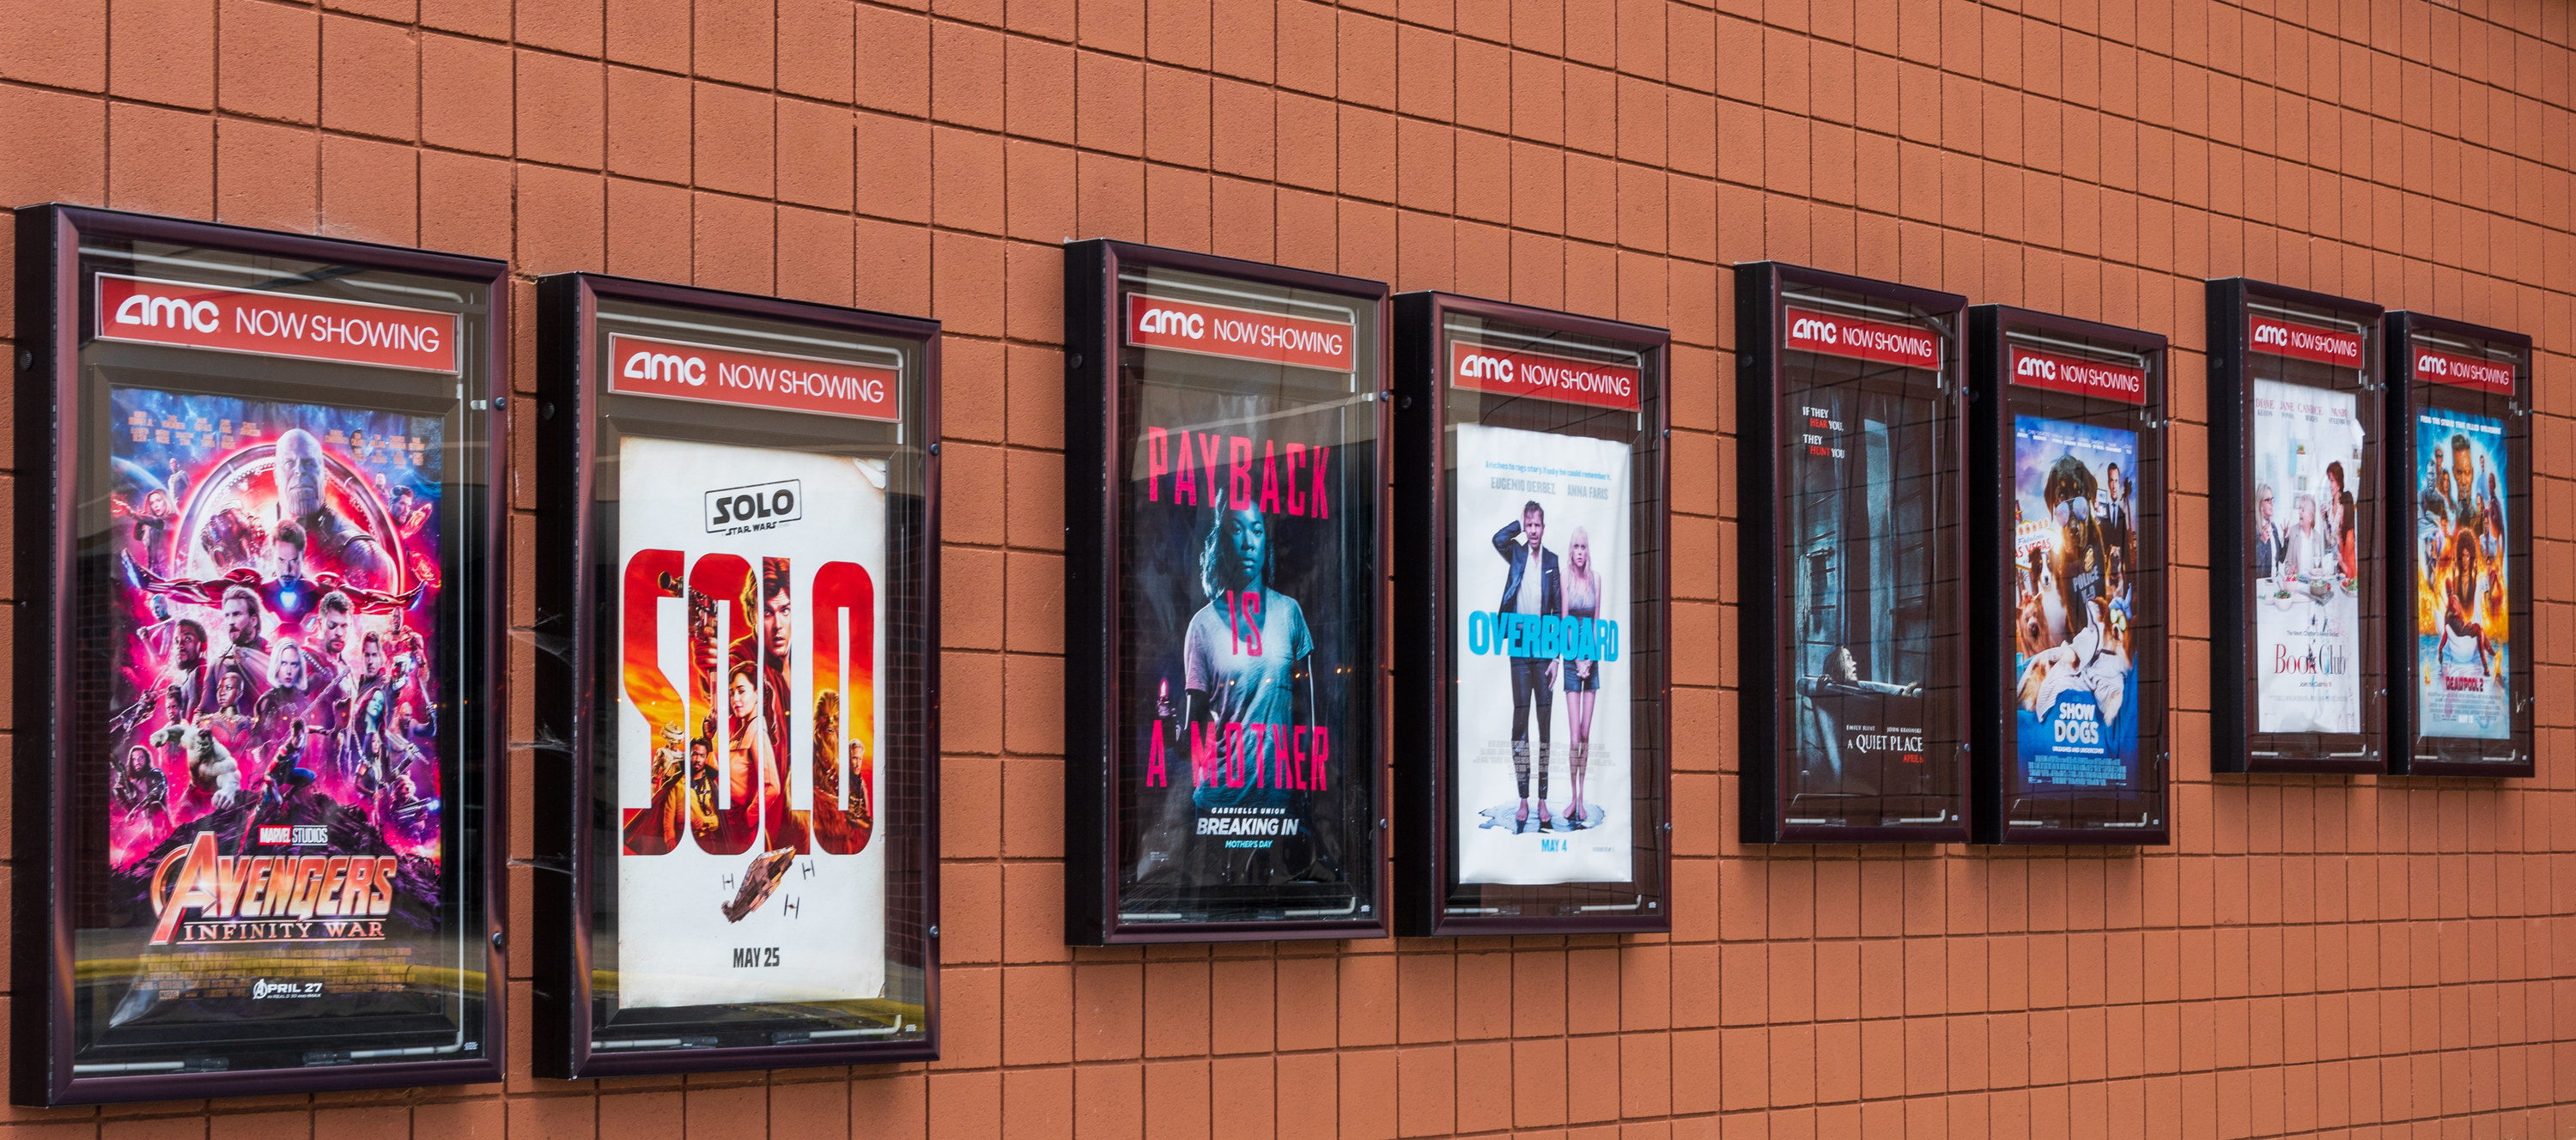 Movie theater posters